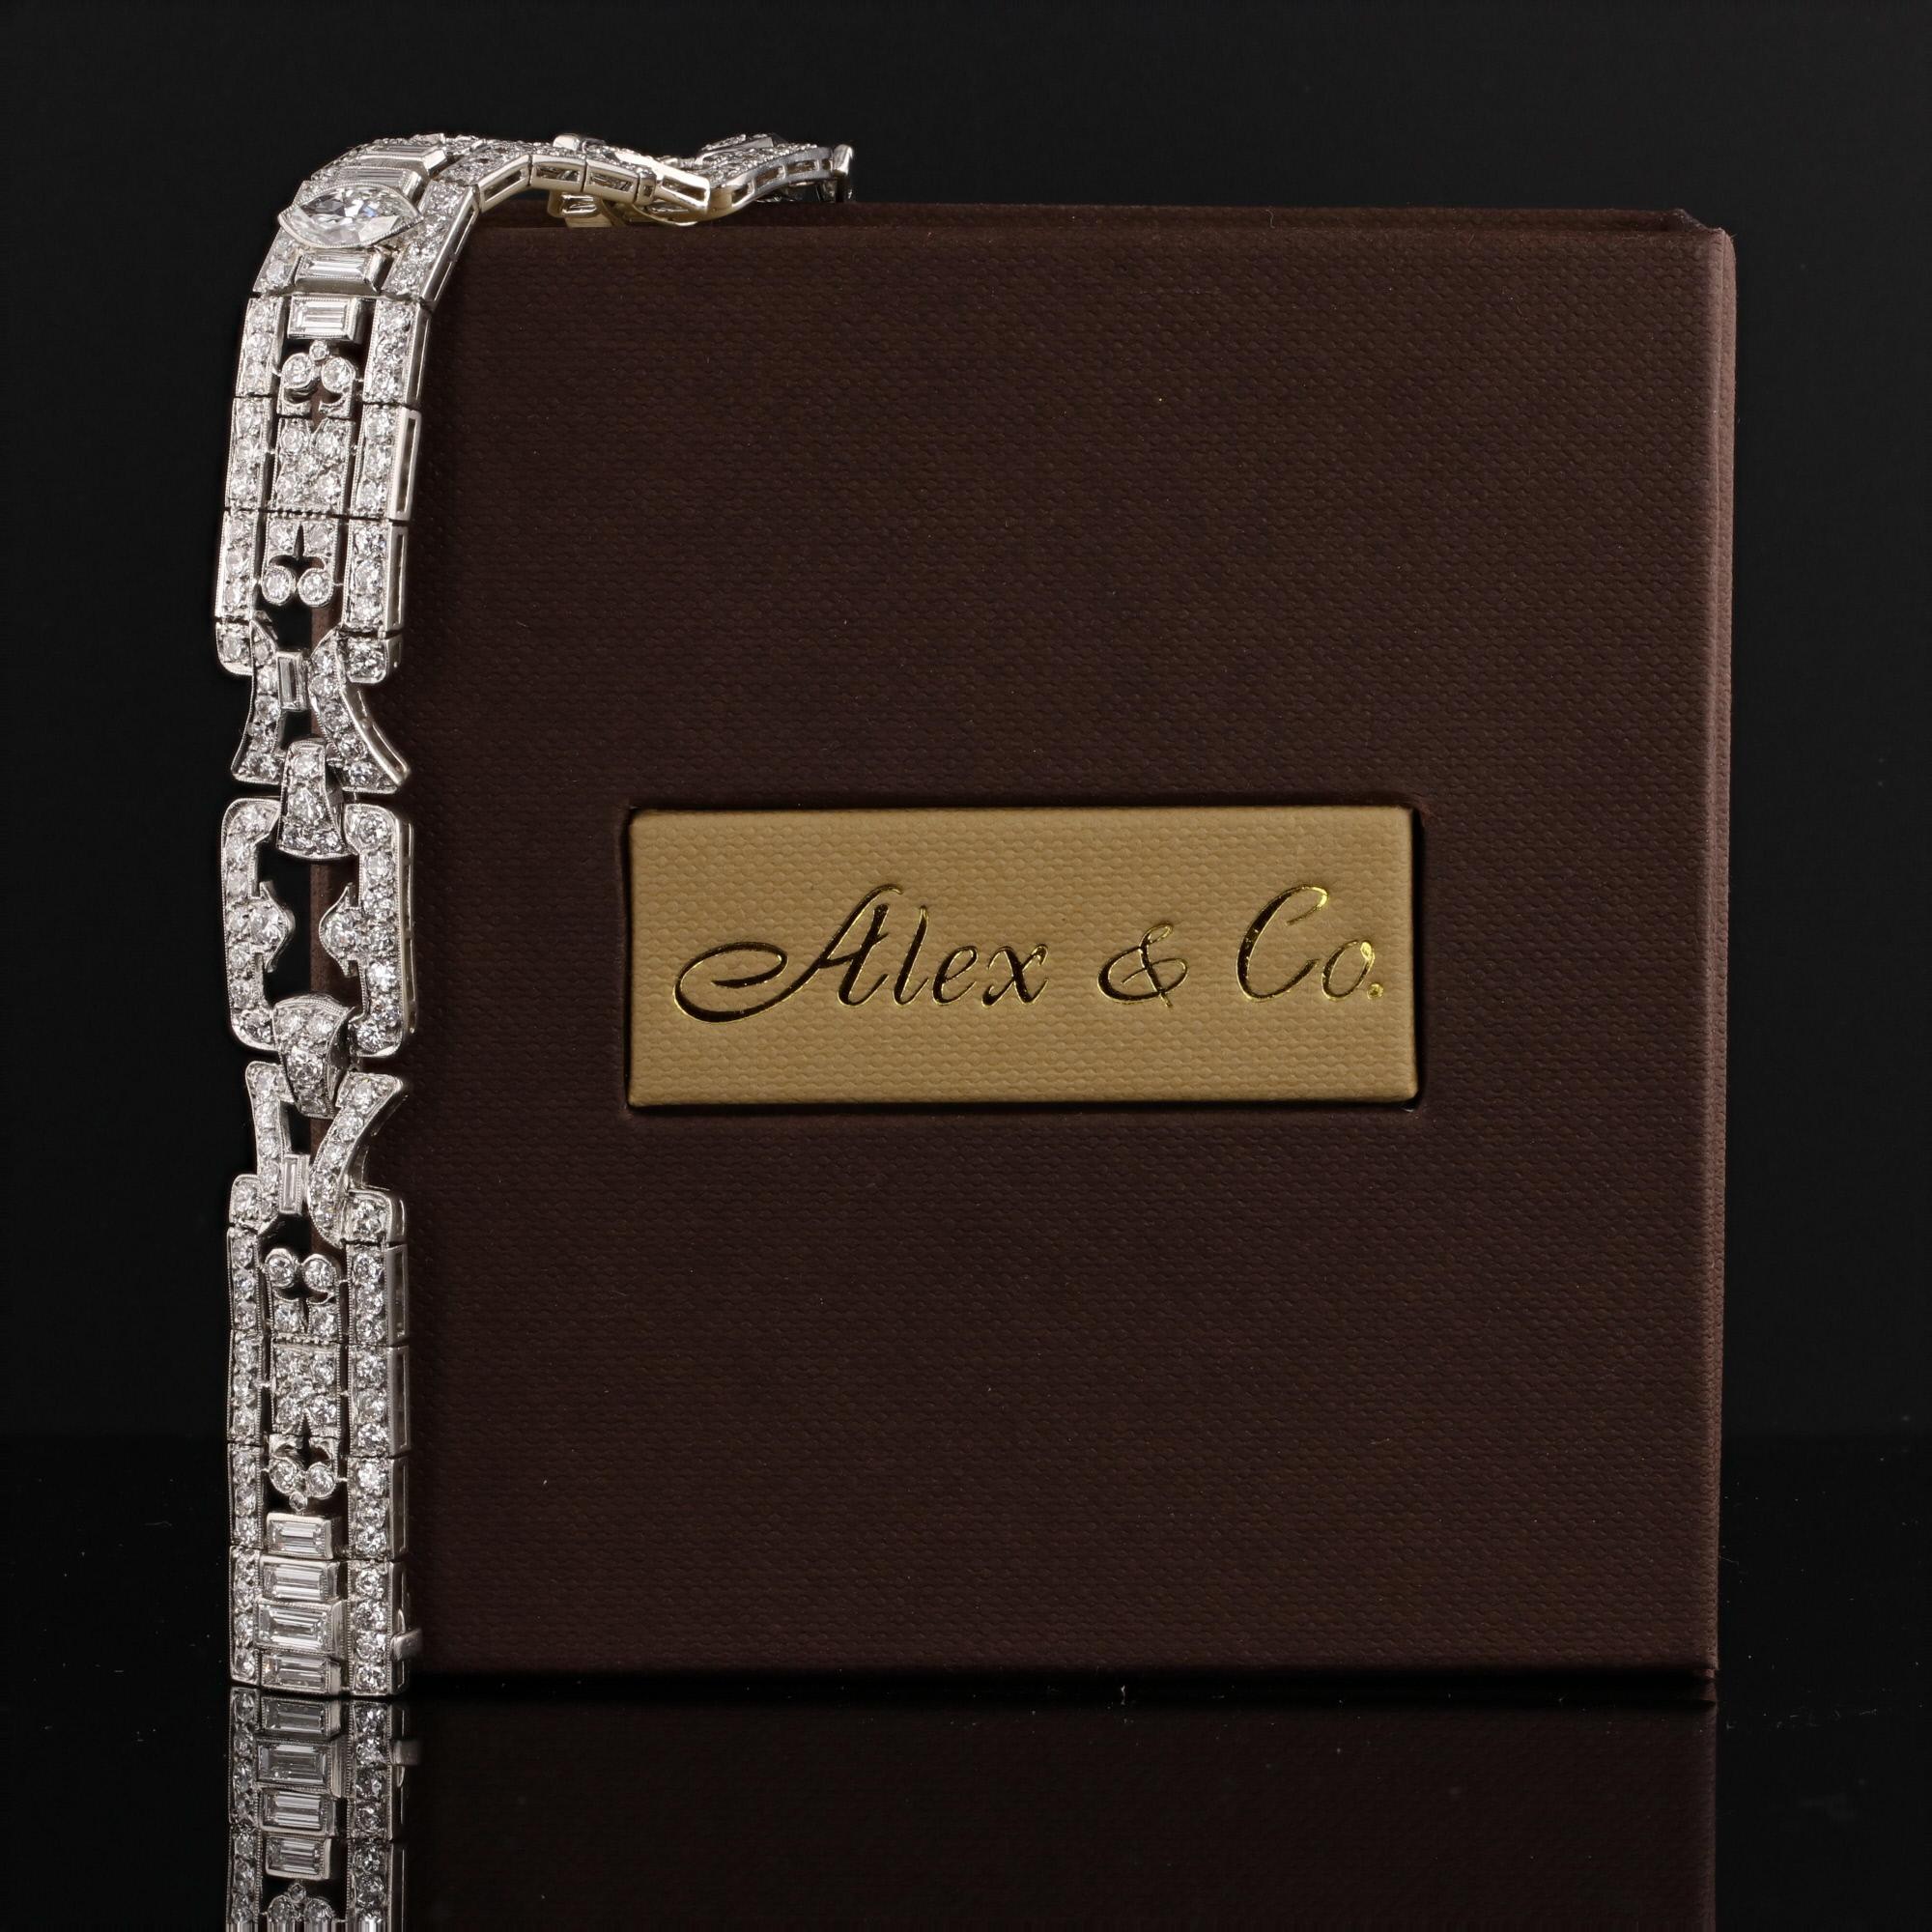 This exquisite handmade antique art deco era 1930's diamond platinum bracelet is offered by Alex & Co. The luxurious bracelet at the center features a bezel set marquise diamond weighing approximately 0.96ct G color and SI1 clarity. There are 13